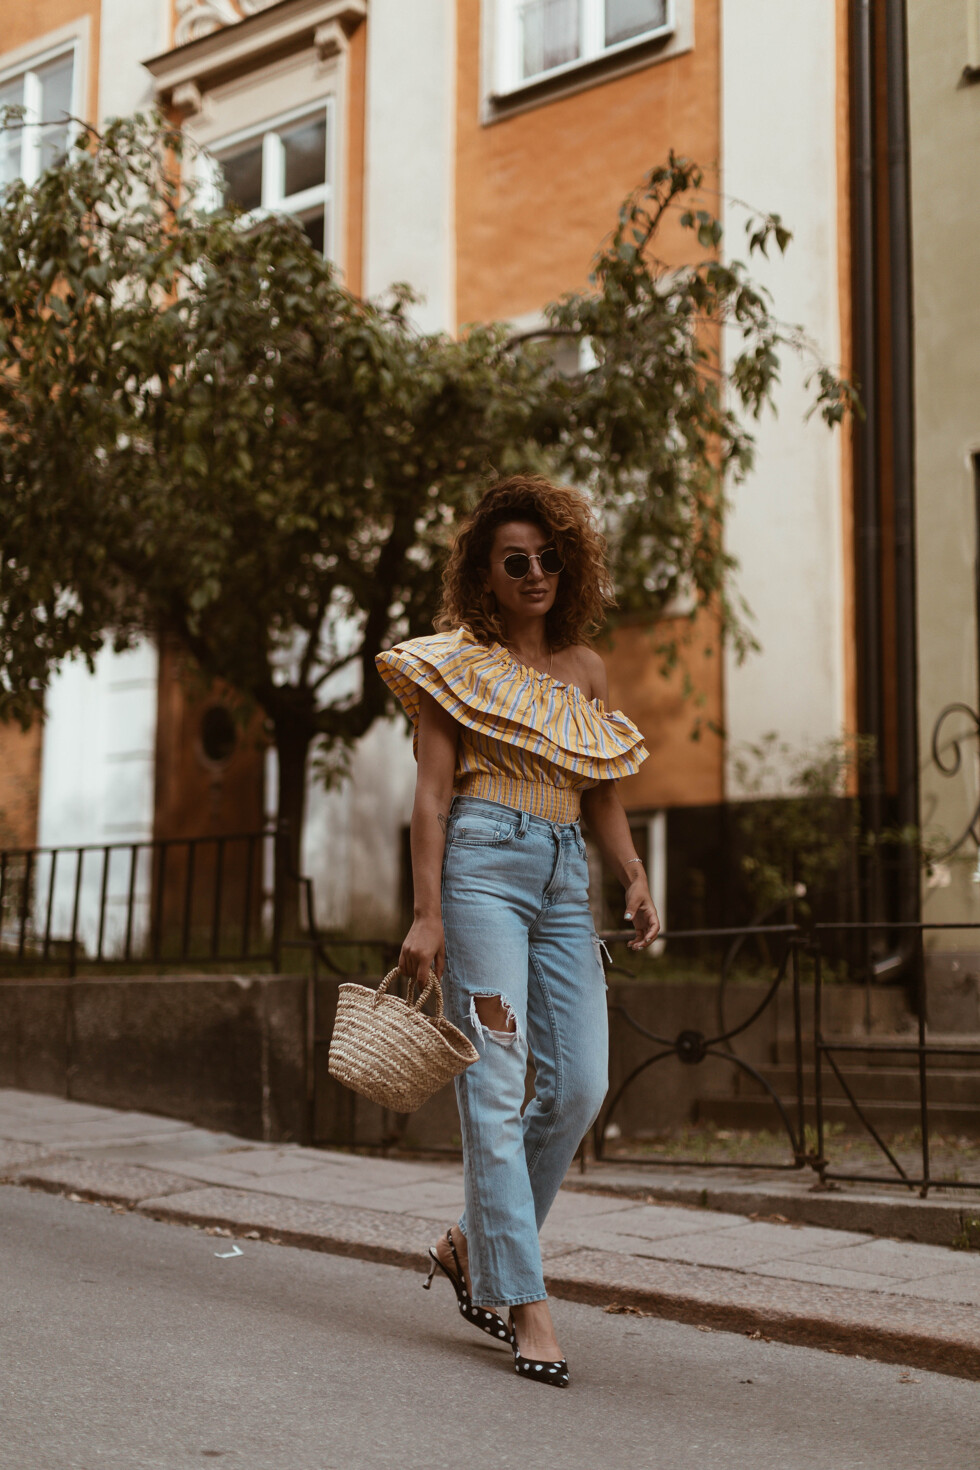 sara-che-river-island-yellow-oversized-frill-top-nly-denim-zara-dotted-kitty-heels-basked-bag-curly-hair